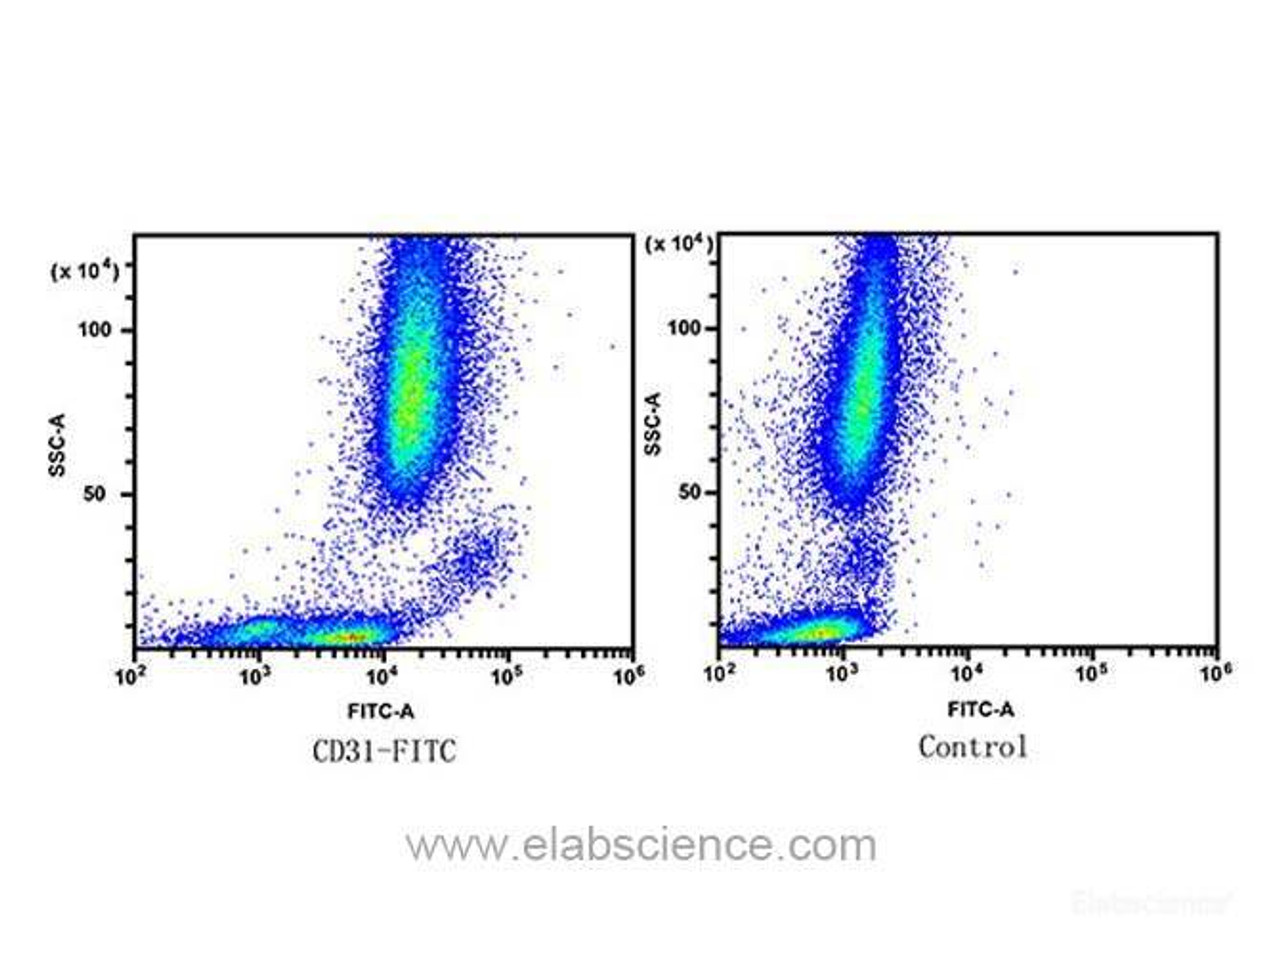 Human peripheral blood lymphocytes, monocytes and granulocytes are stained with Anti-Human CD31 Monoclonal Antibody(FITC Conjugated)(Left). human peripheral blood lymphocytes, monocytes and granulocytes are used as control(Right).